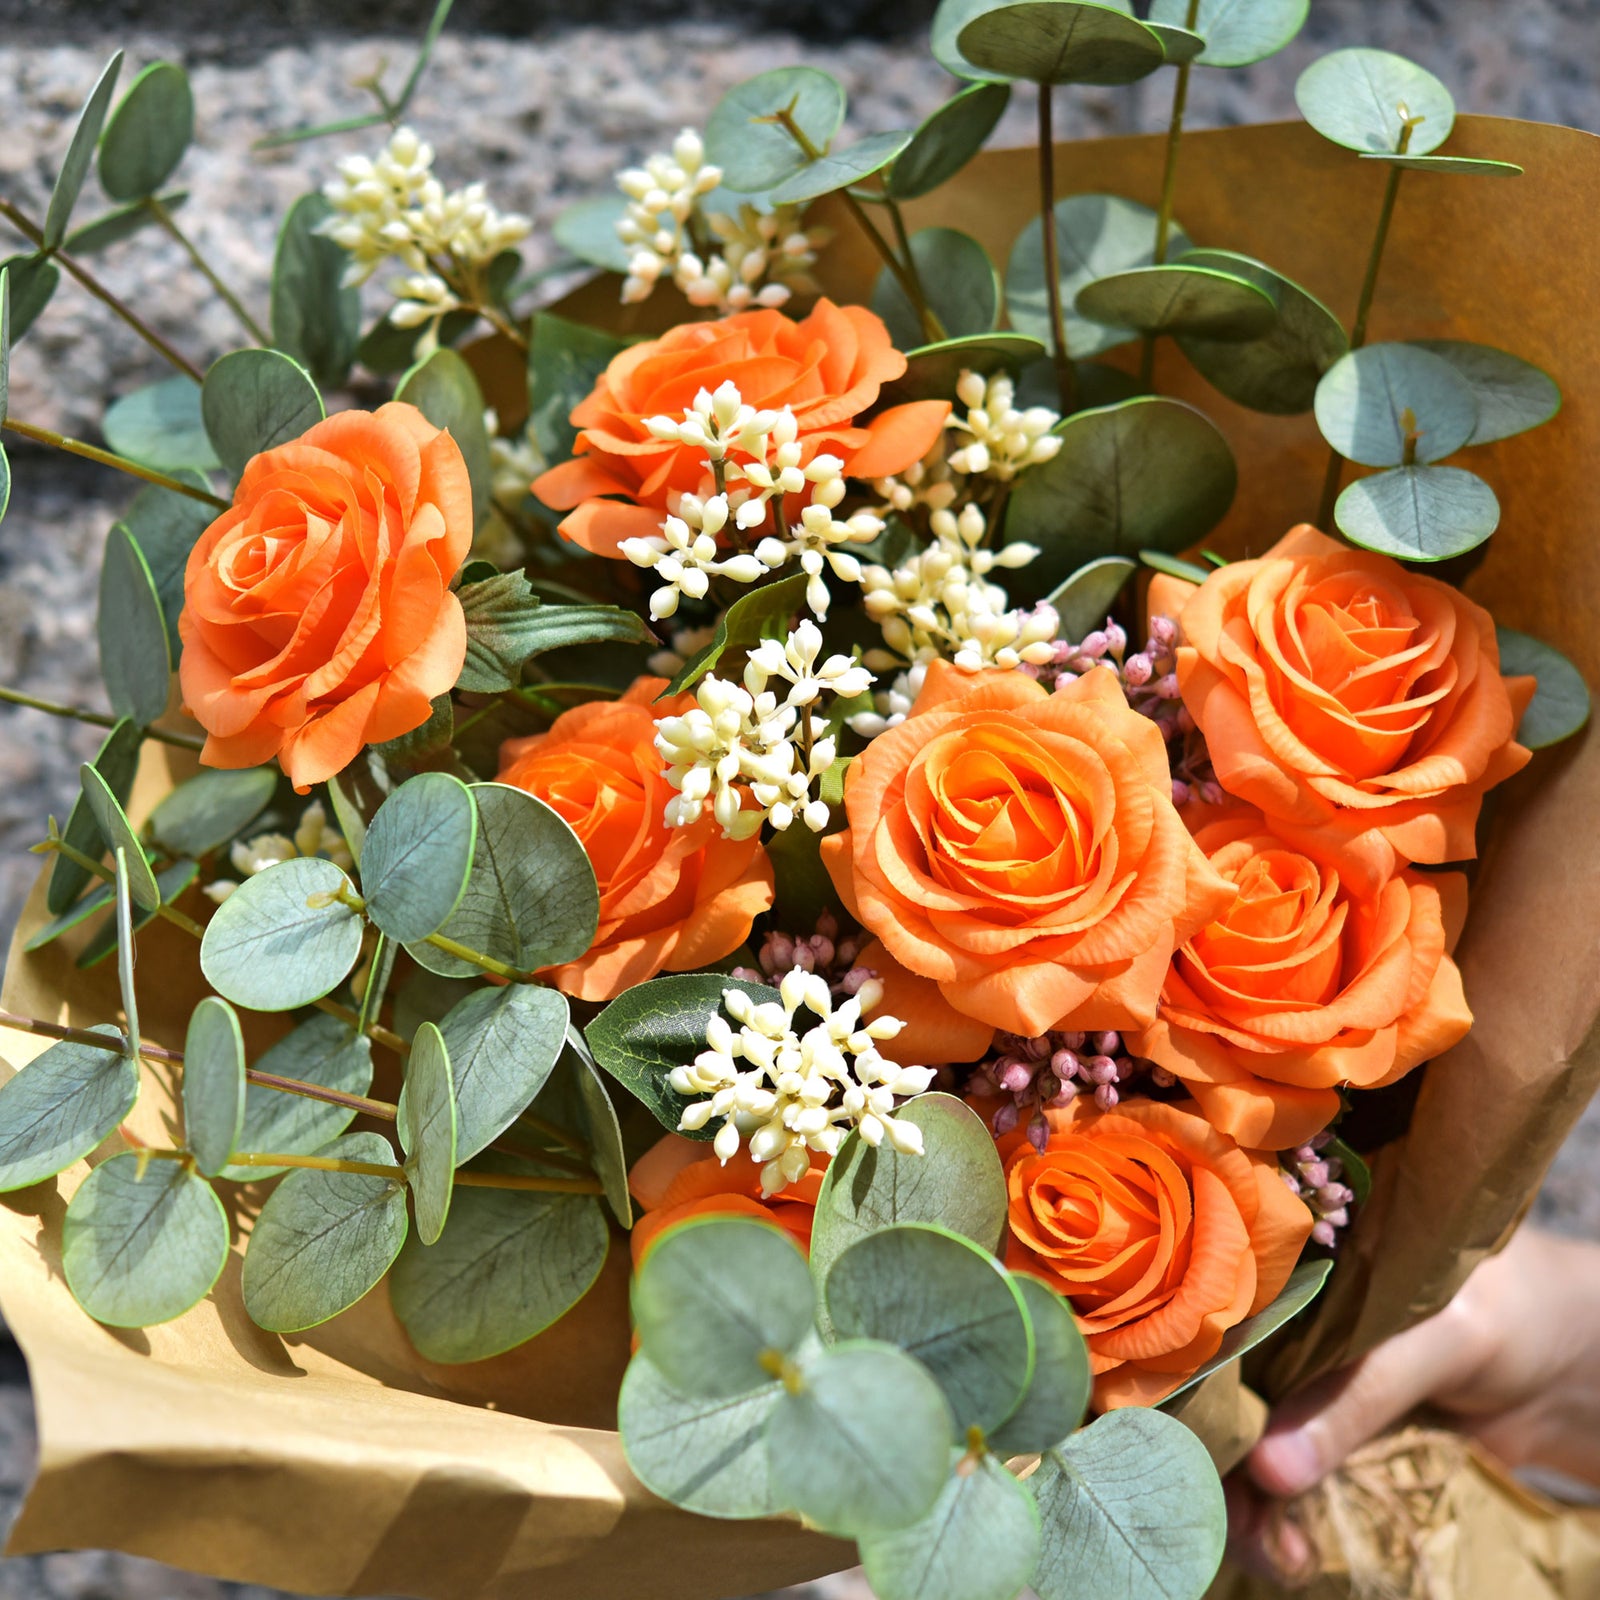 Real Touch 10 Stems Orange Silk Artificial Roses Flowers ‘Petals Feel and Look like Fresh Roses'